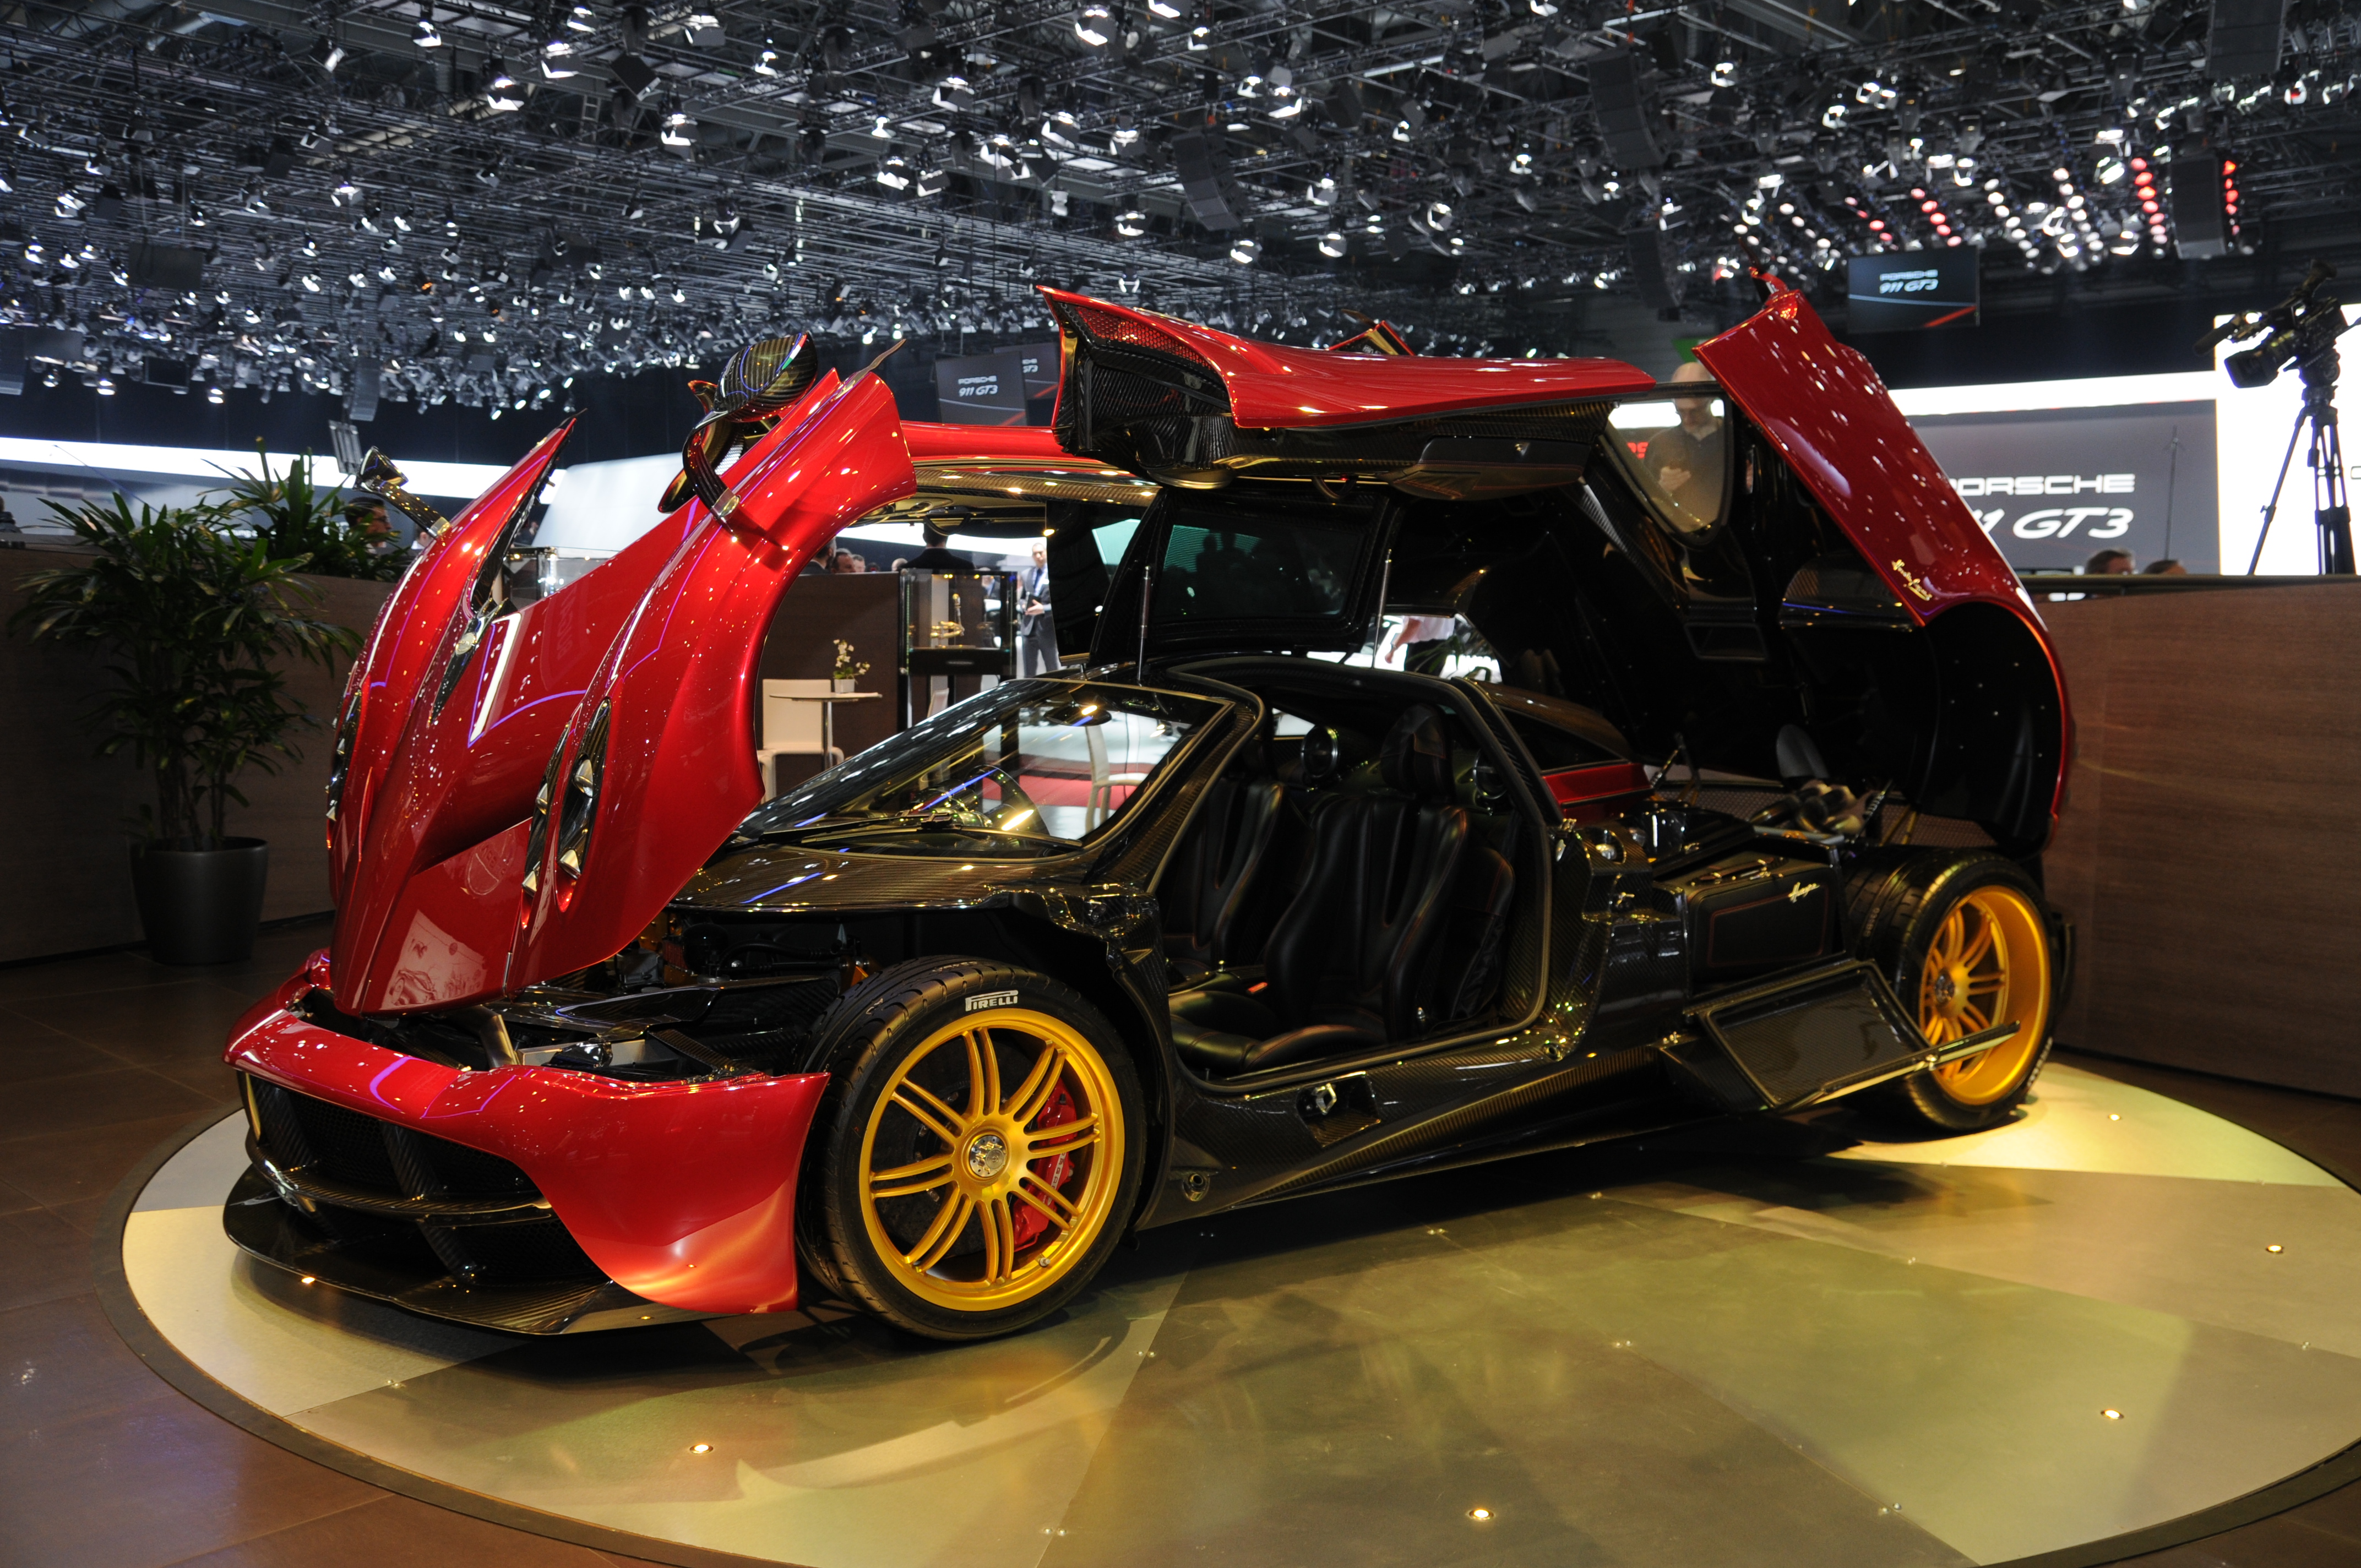 Pagani Huayra Backgrounds, Compatible - PC, Mobile, Gadgets| 4288x2848 px